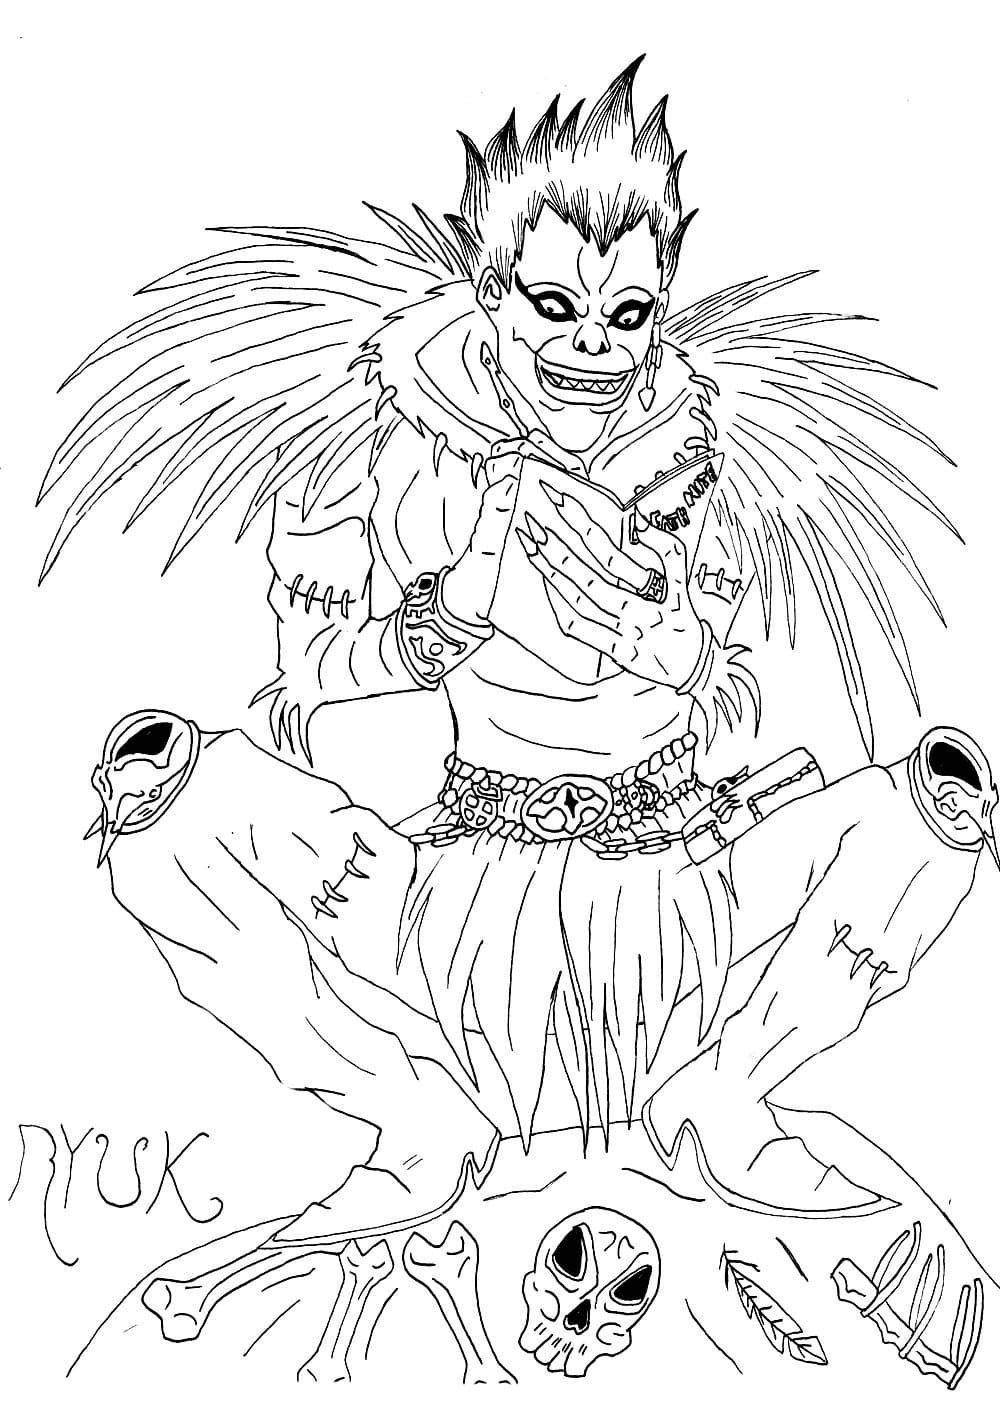 Ryuk is reading a notebook Coloring Pages